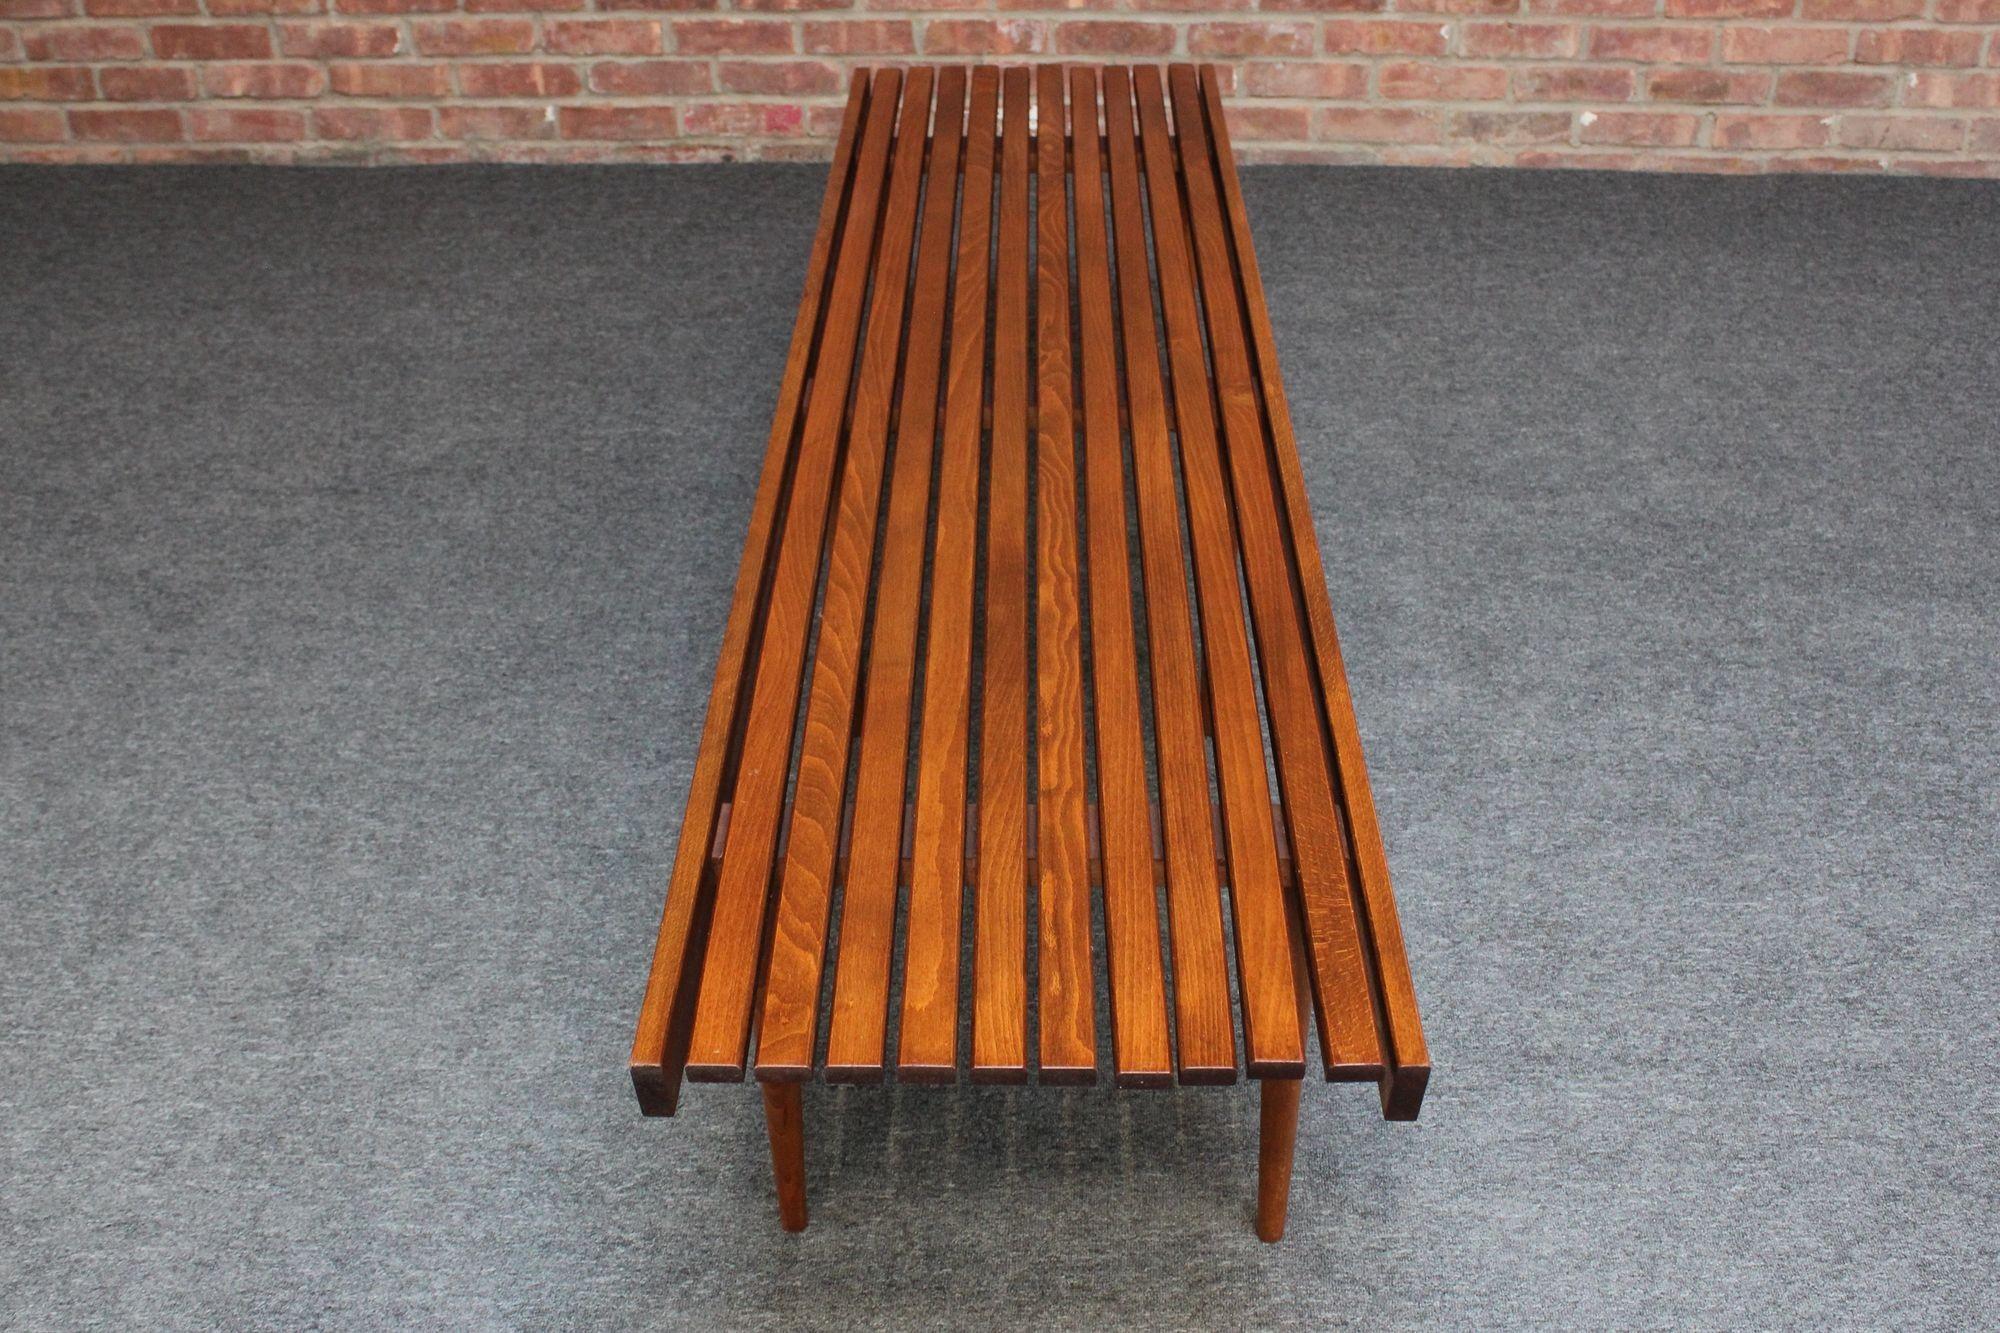 Long Mid-Century Modern Walnut Slatted Bench / Coffee Table with Tapered Legs In Good Condition For Sale In Brooklyn, NY